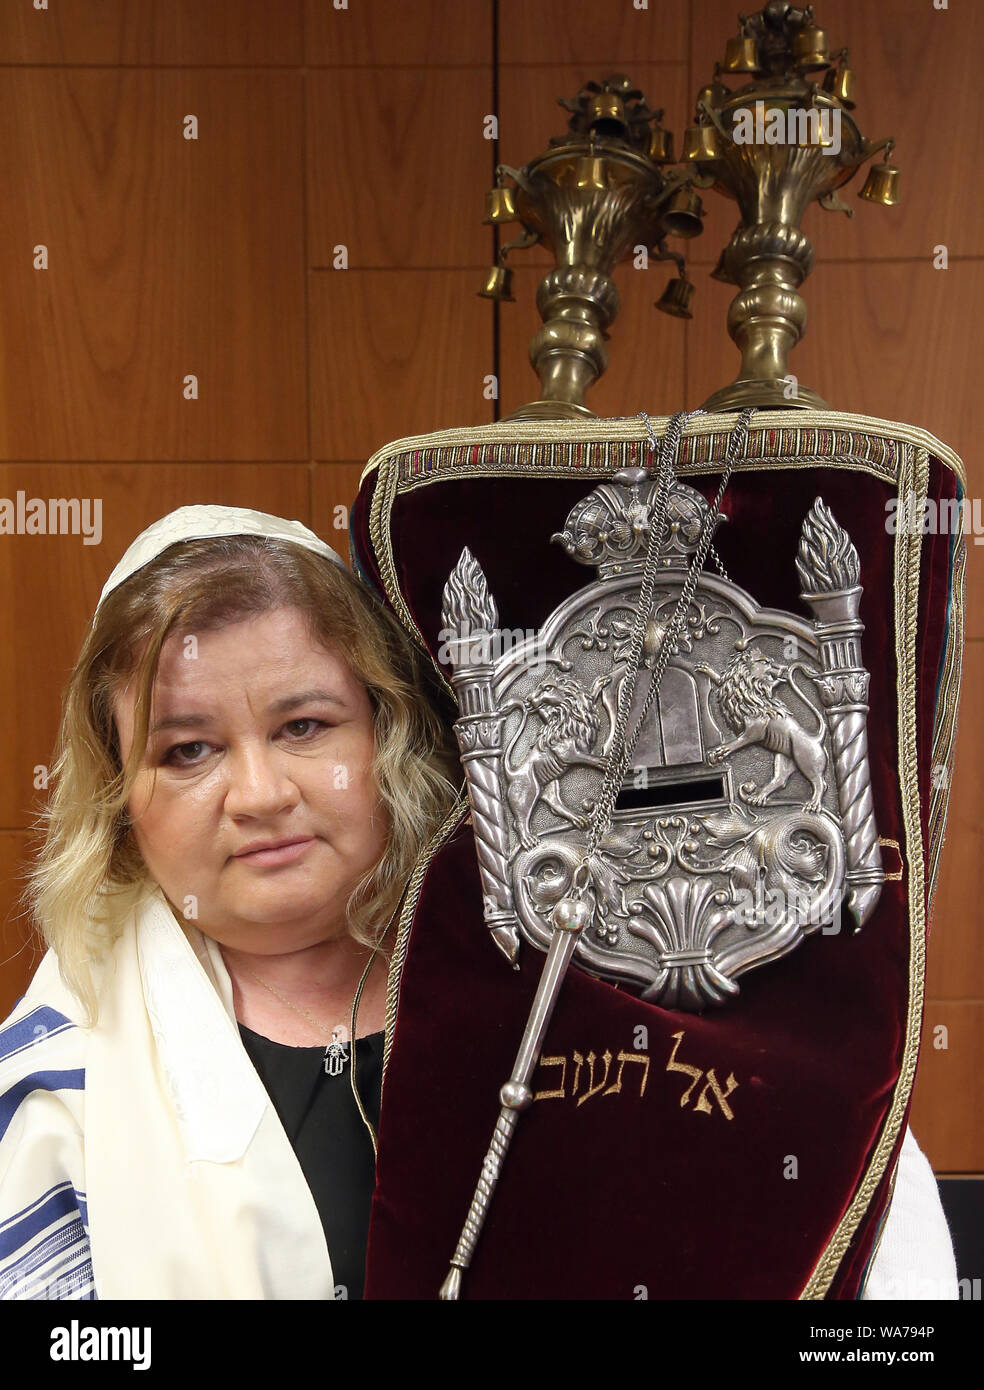 13 August 2019, Berlin: Anita Kantor holds a Torah scroll in her hands at  the Abraham Geiger College (AGK). As soon as she has finished her training  as a rabbi at the